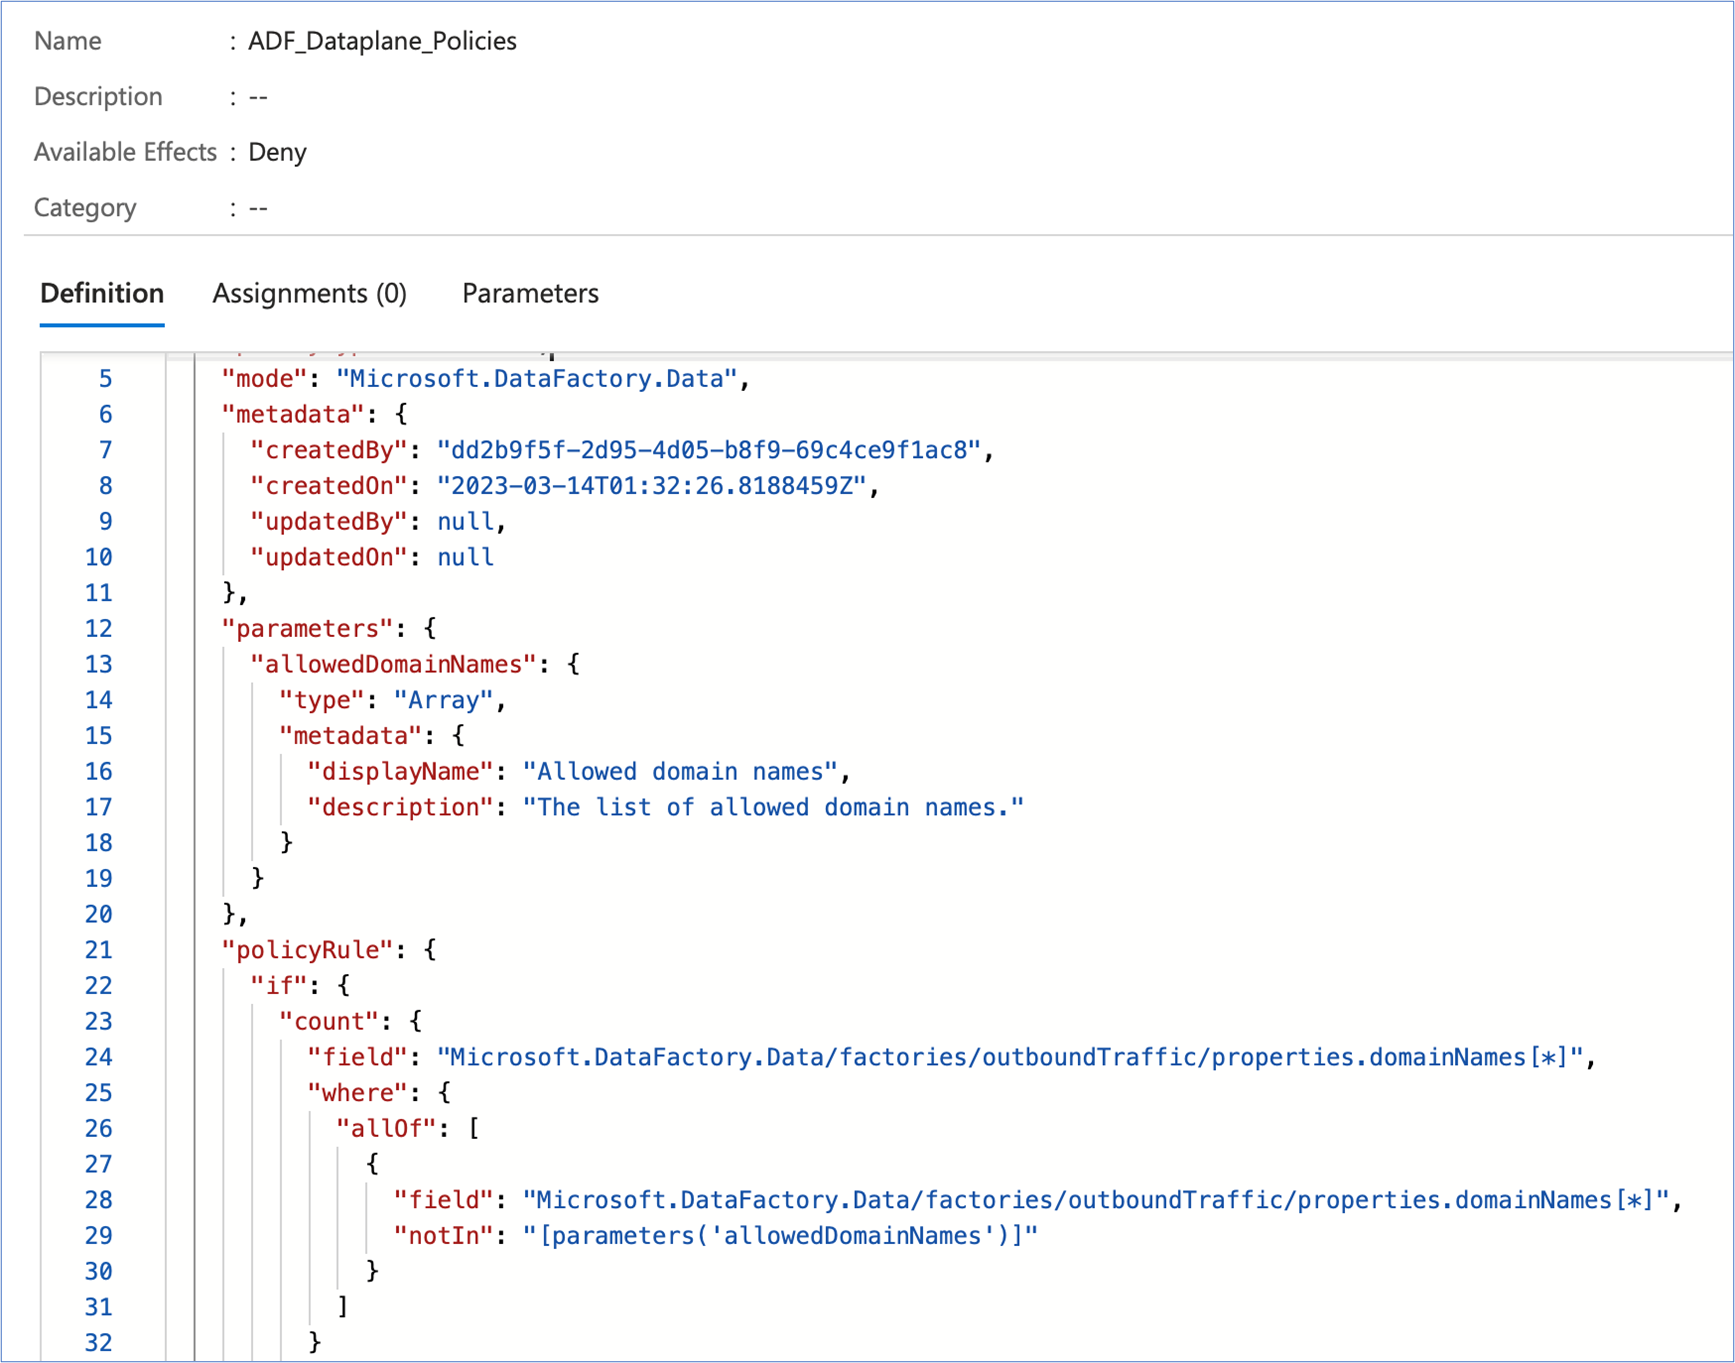 Screenshot showing the ADF data plane Policies for Microsoft Azure.